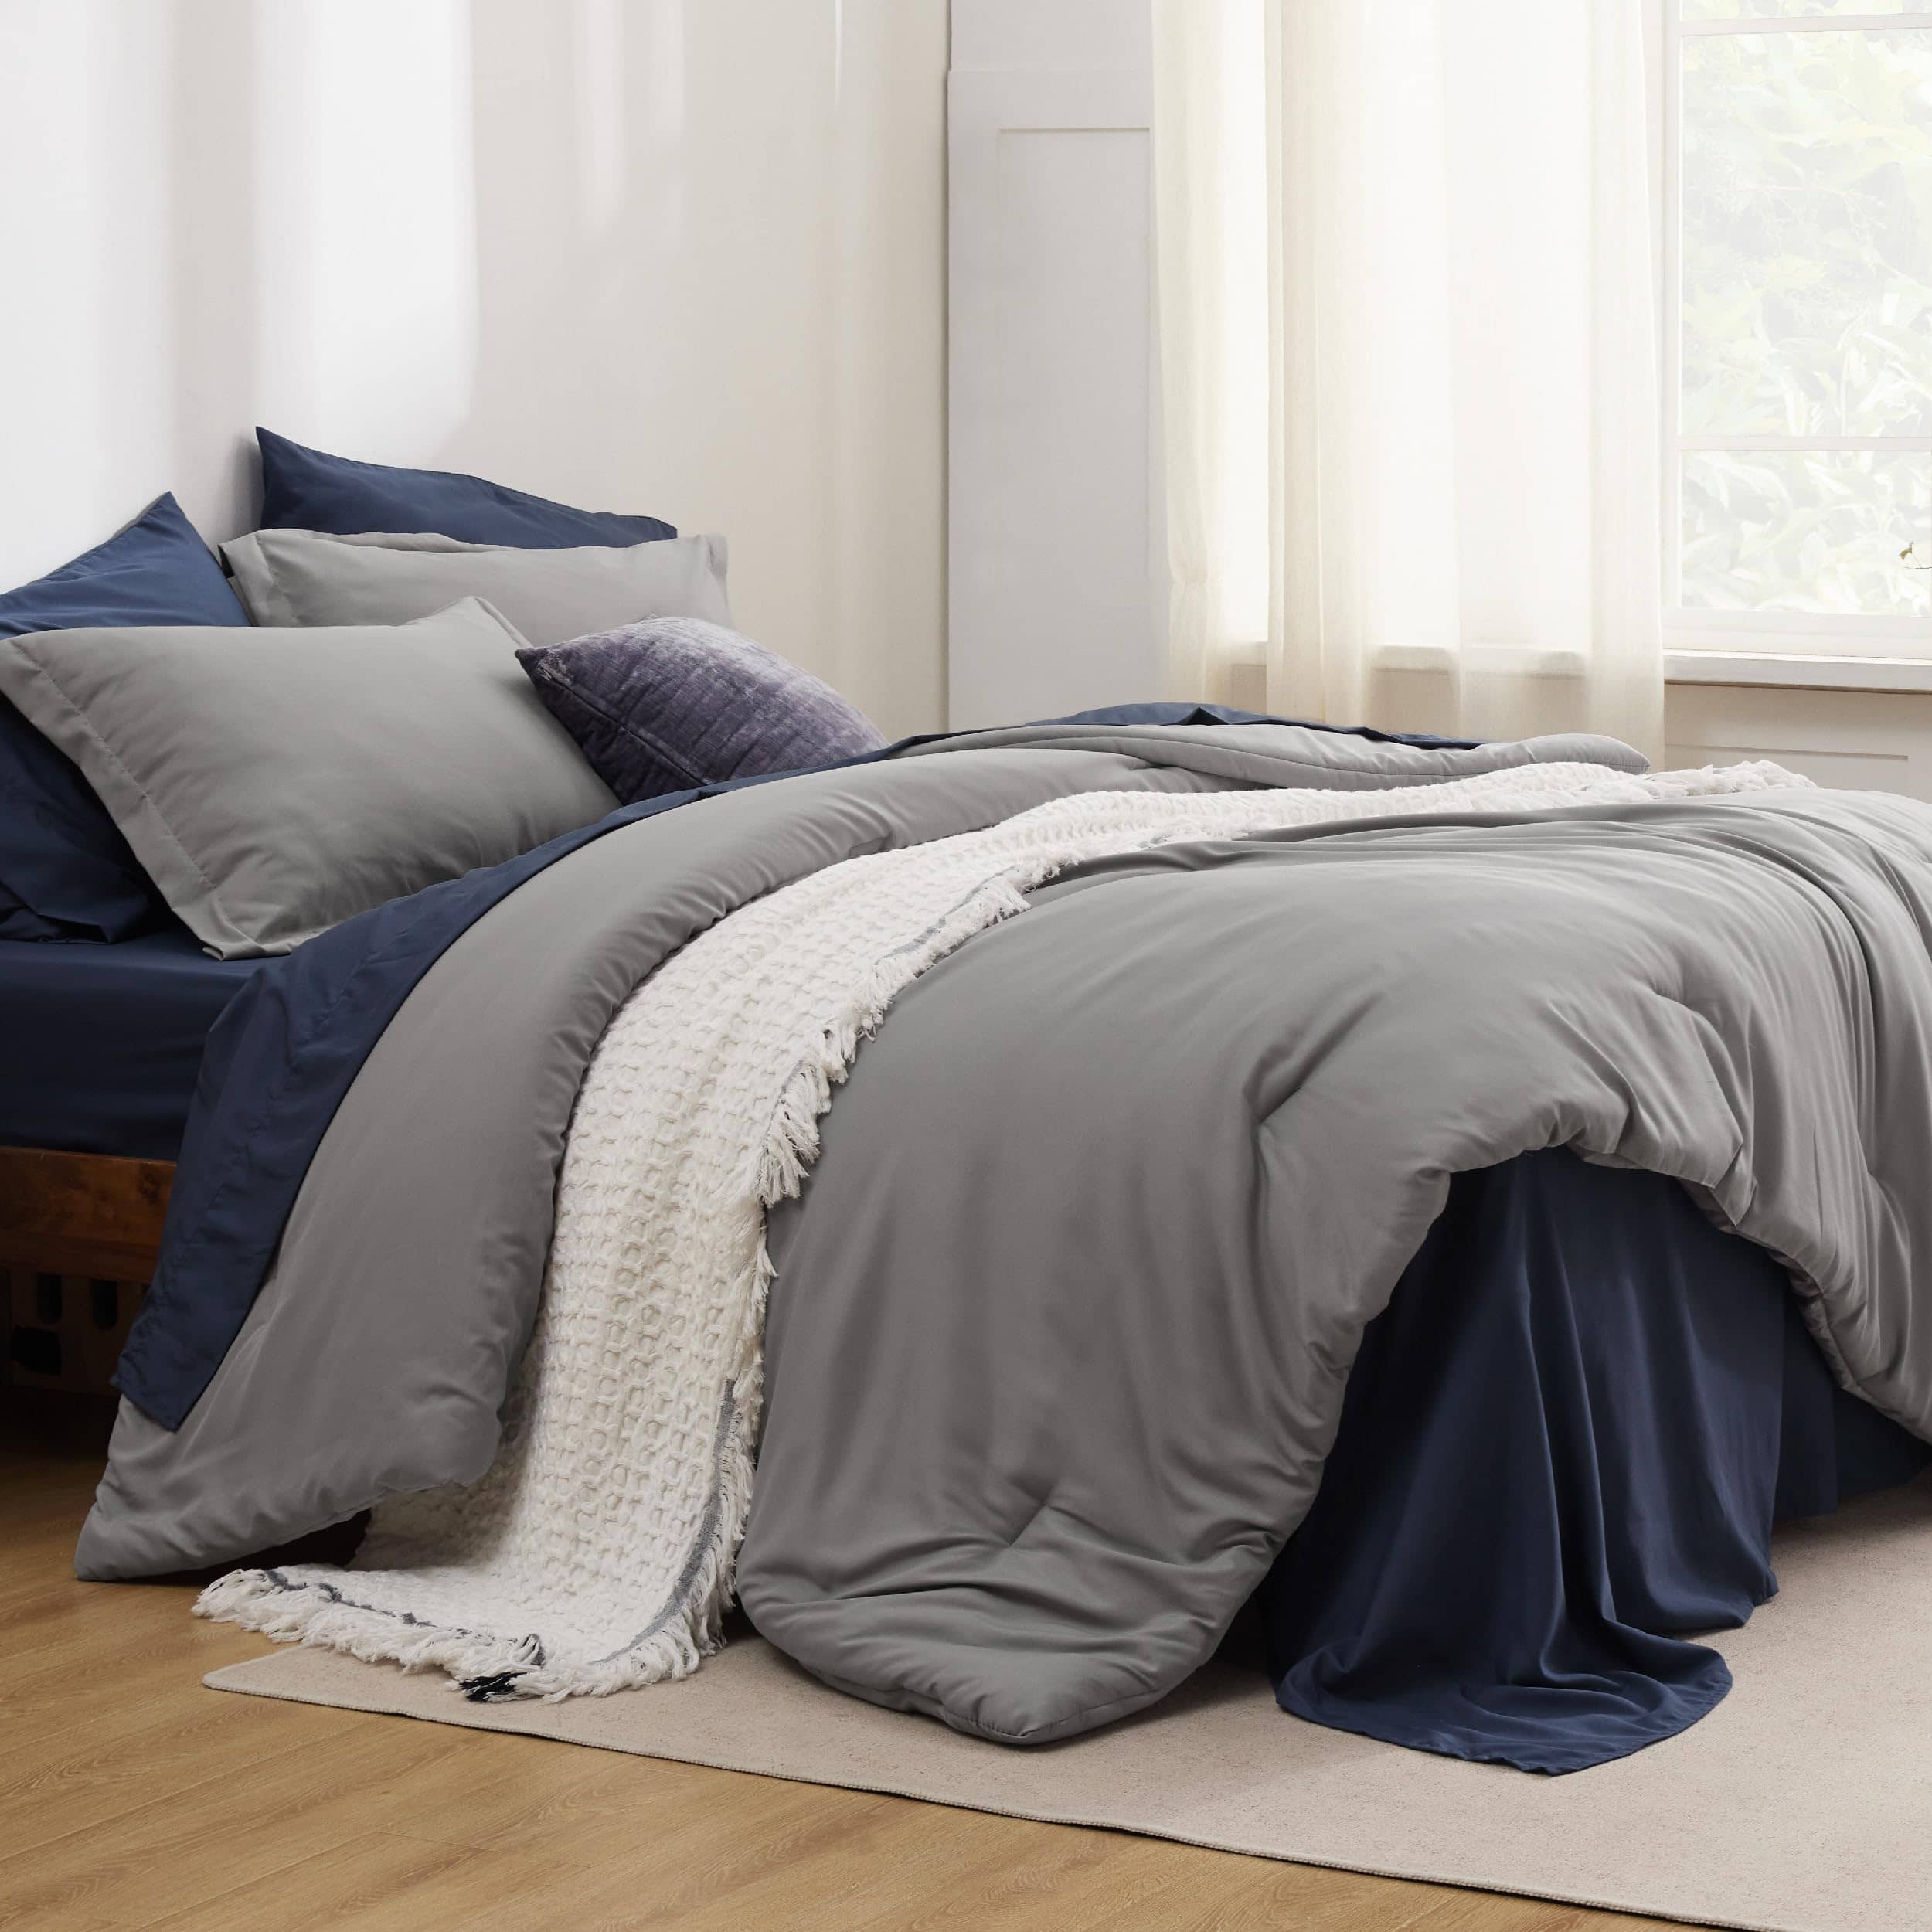 Dual-Tone Bed-in-a-Bag